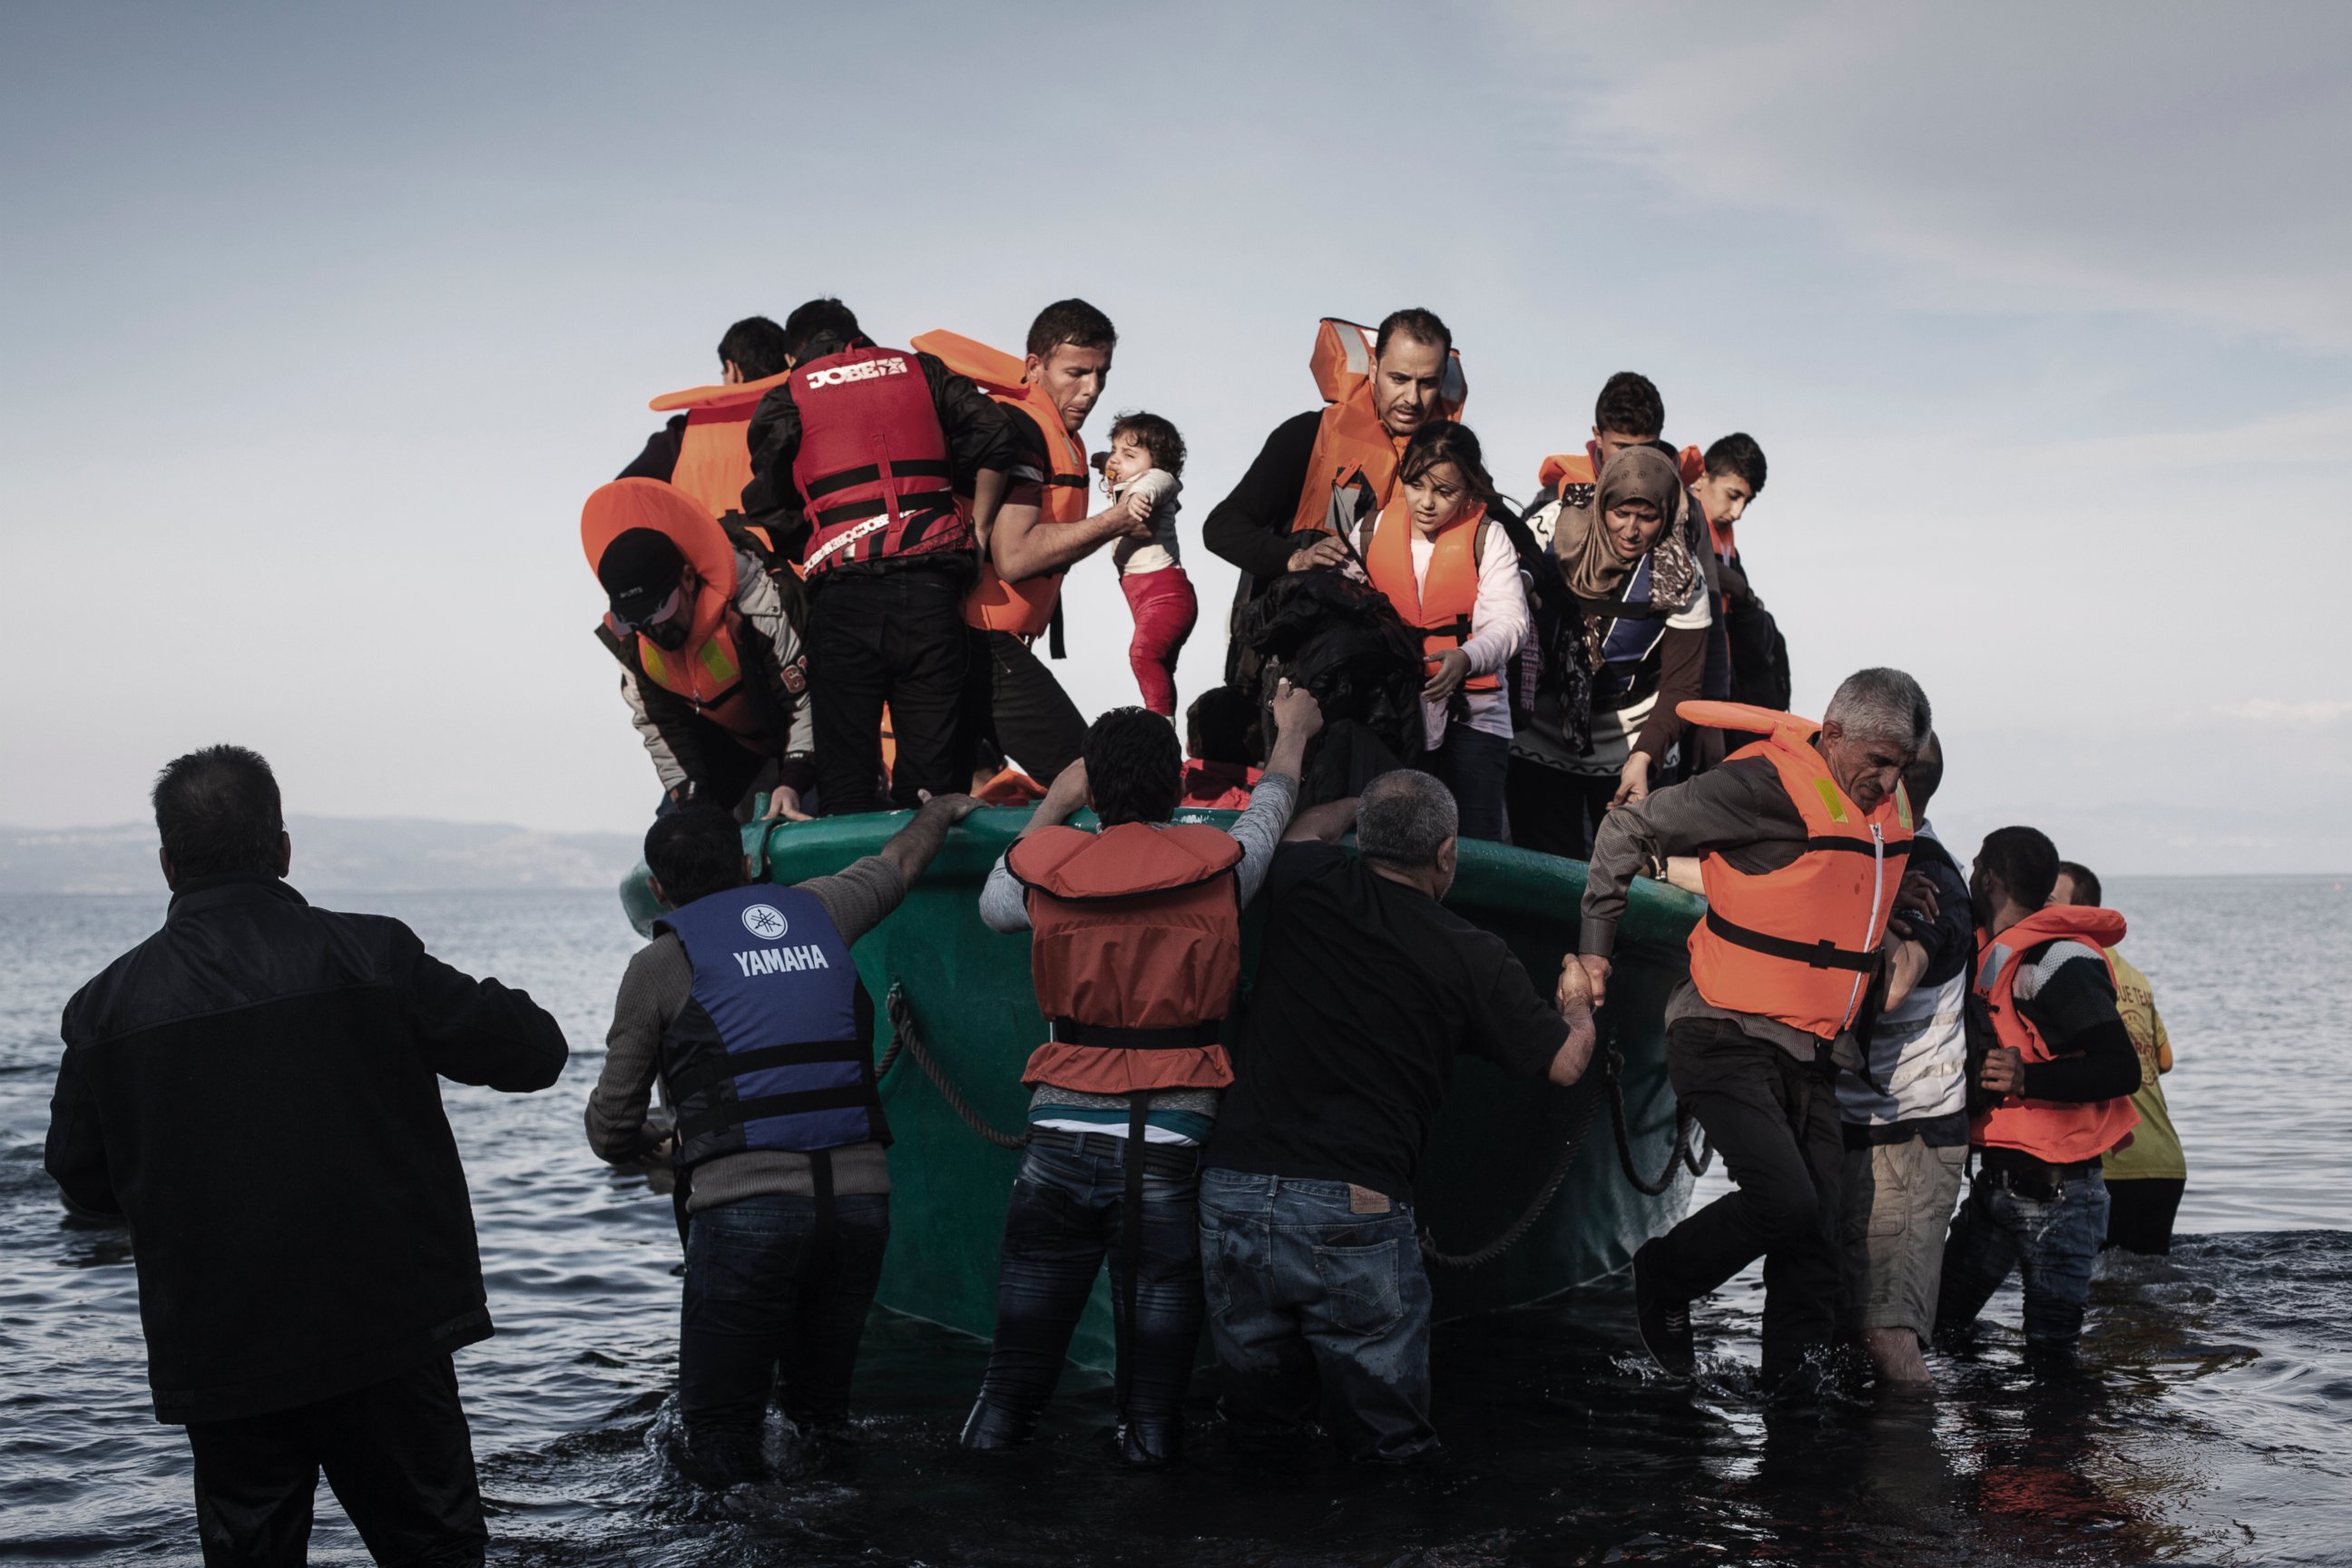 PHOTO: Refugees from Afghanistan and Syria disembark from a life boat on the shores of Lesbos near Skala Sikaminias, Greece, Nov. 10, 2015. 